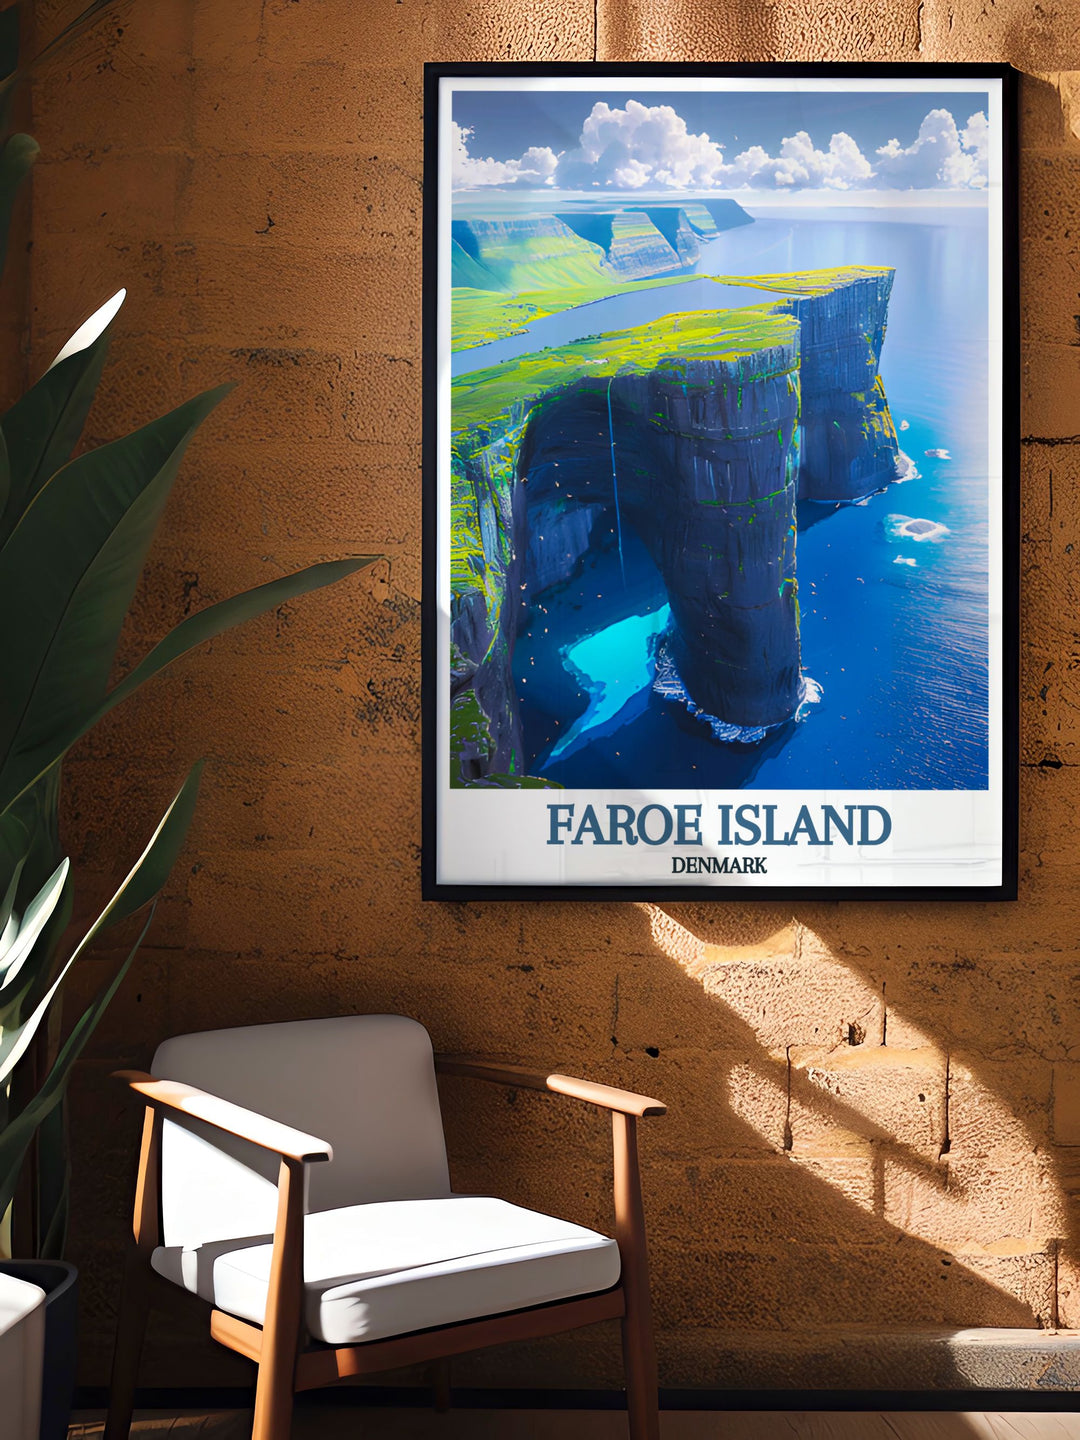 The natural beauty and dramatic landscapes of the Faroe Islands are celebrated in this poster, featuring the iconic Sørvágsvatn and inviting you to explore its breathtaking views.